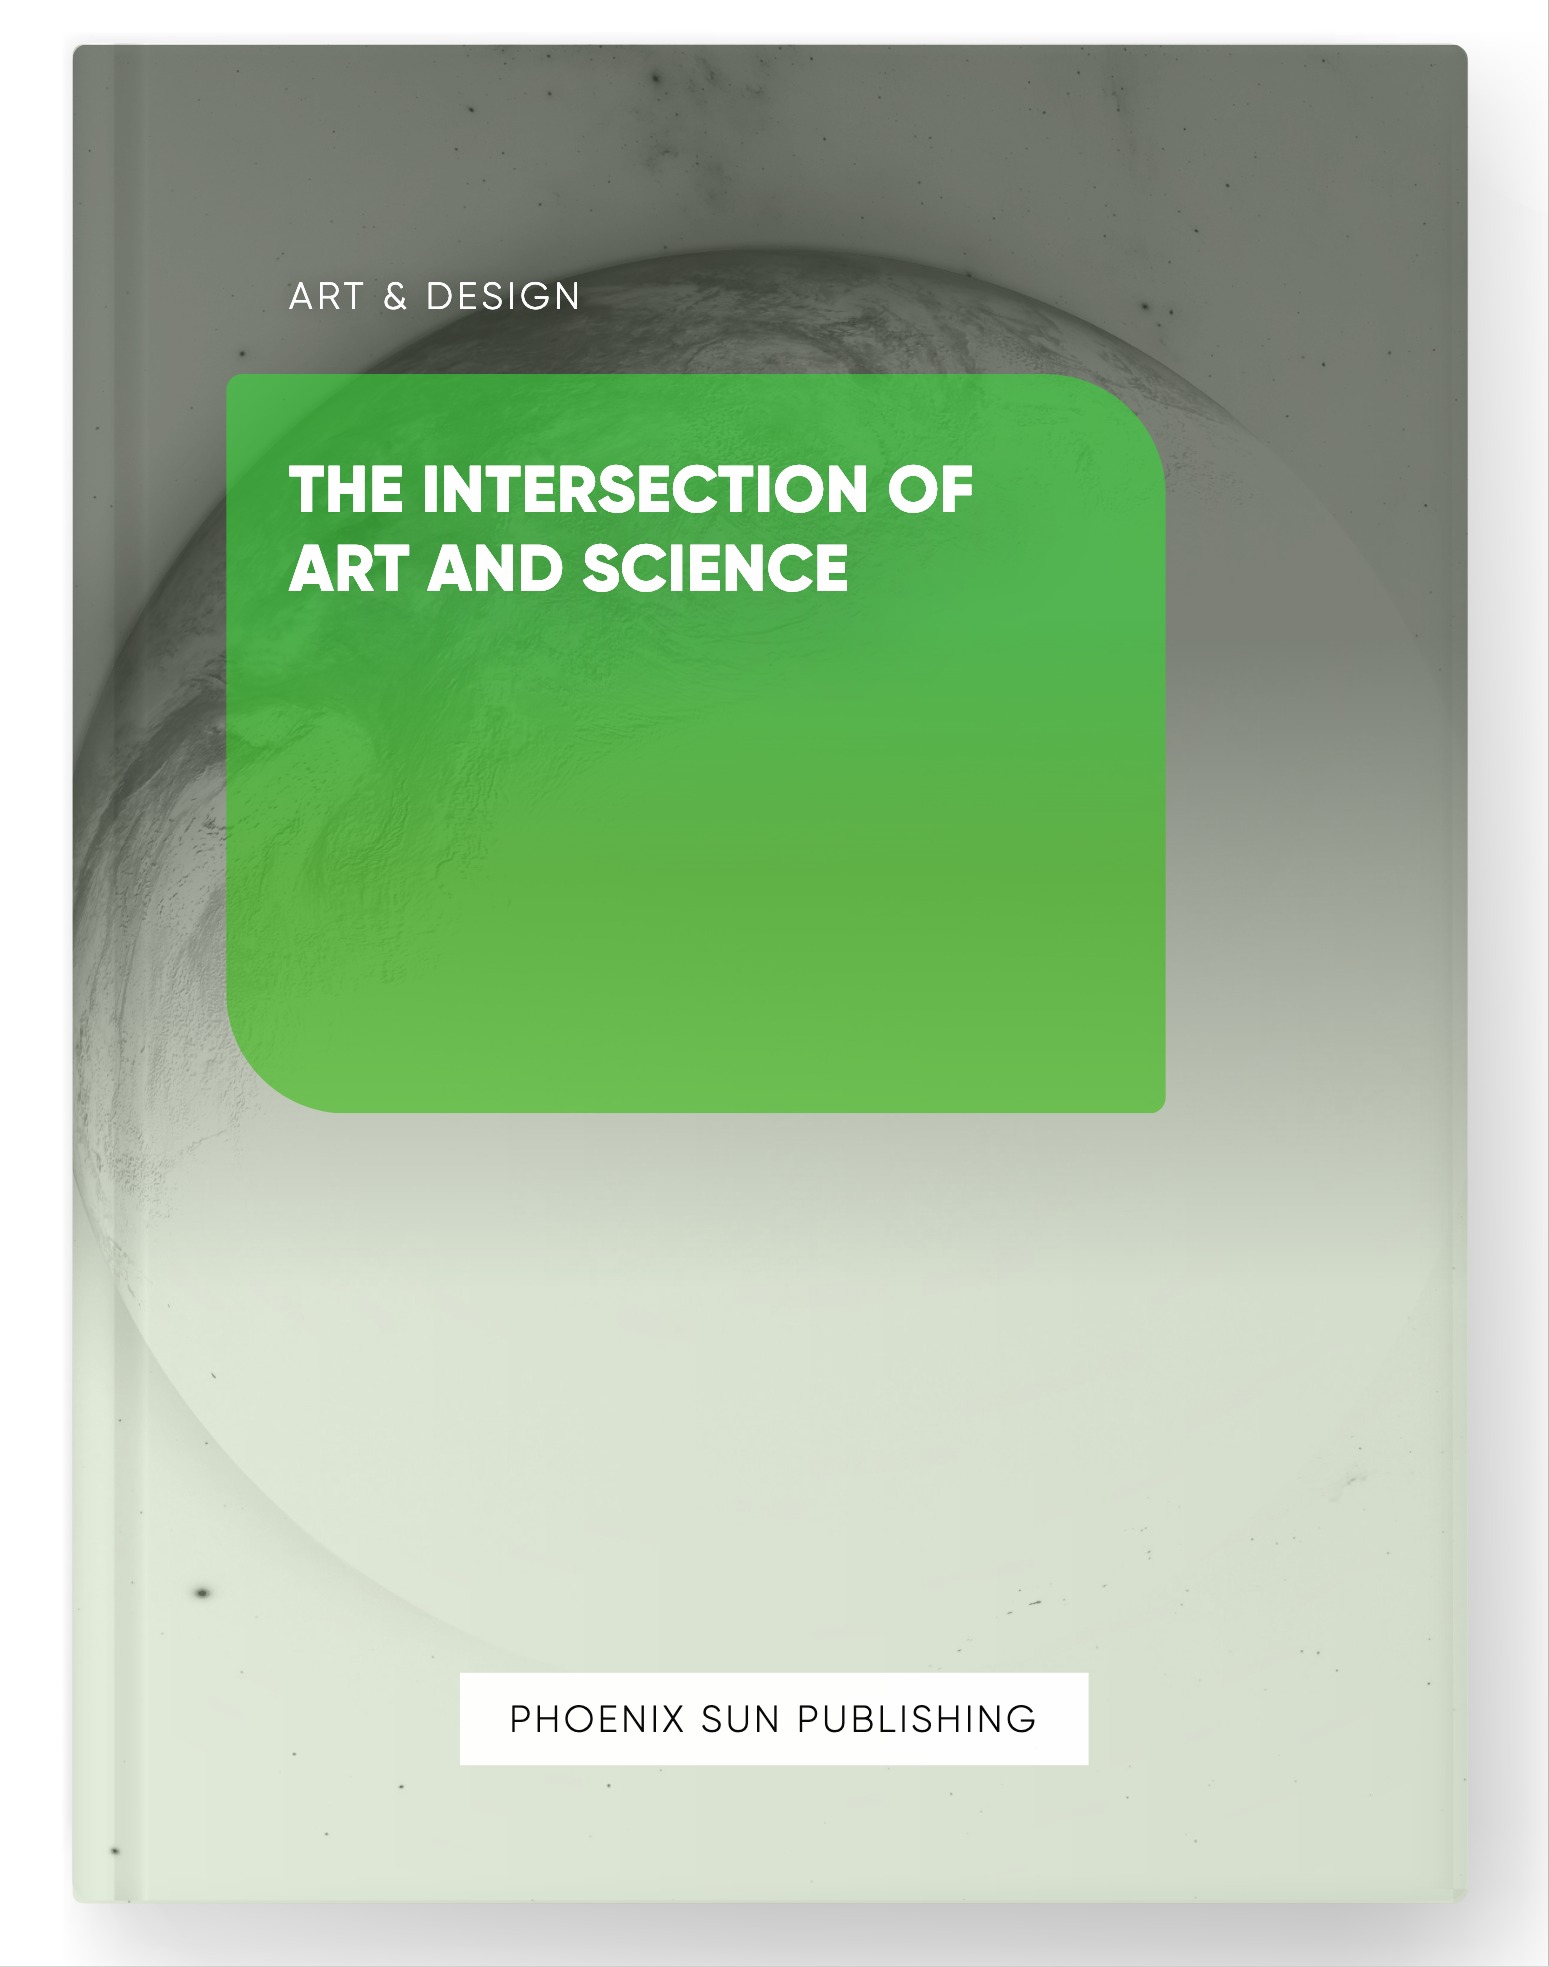 The Intersection of Art and Science